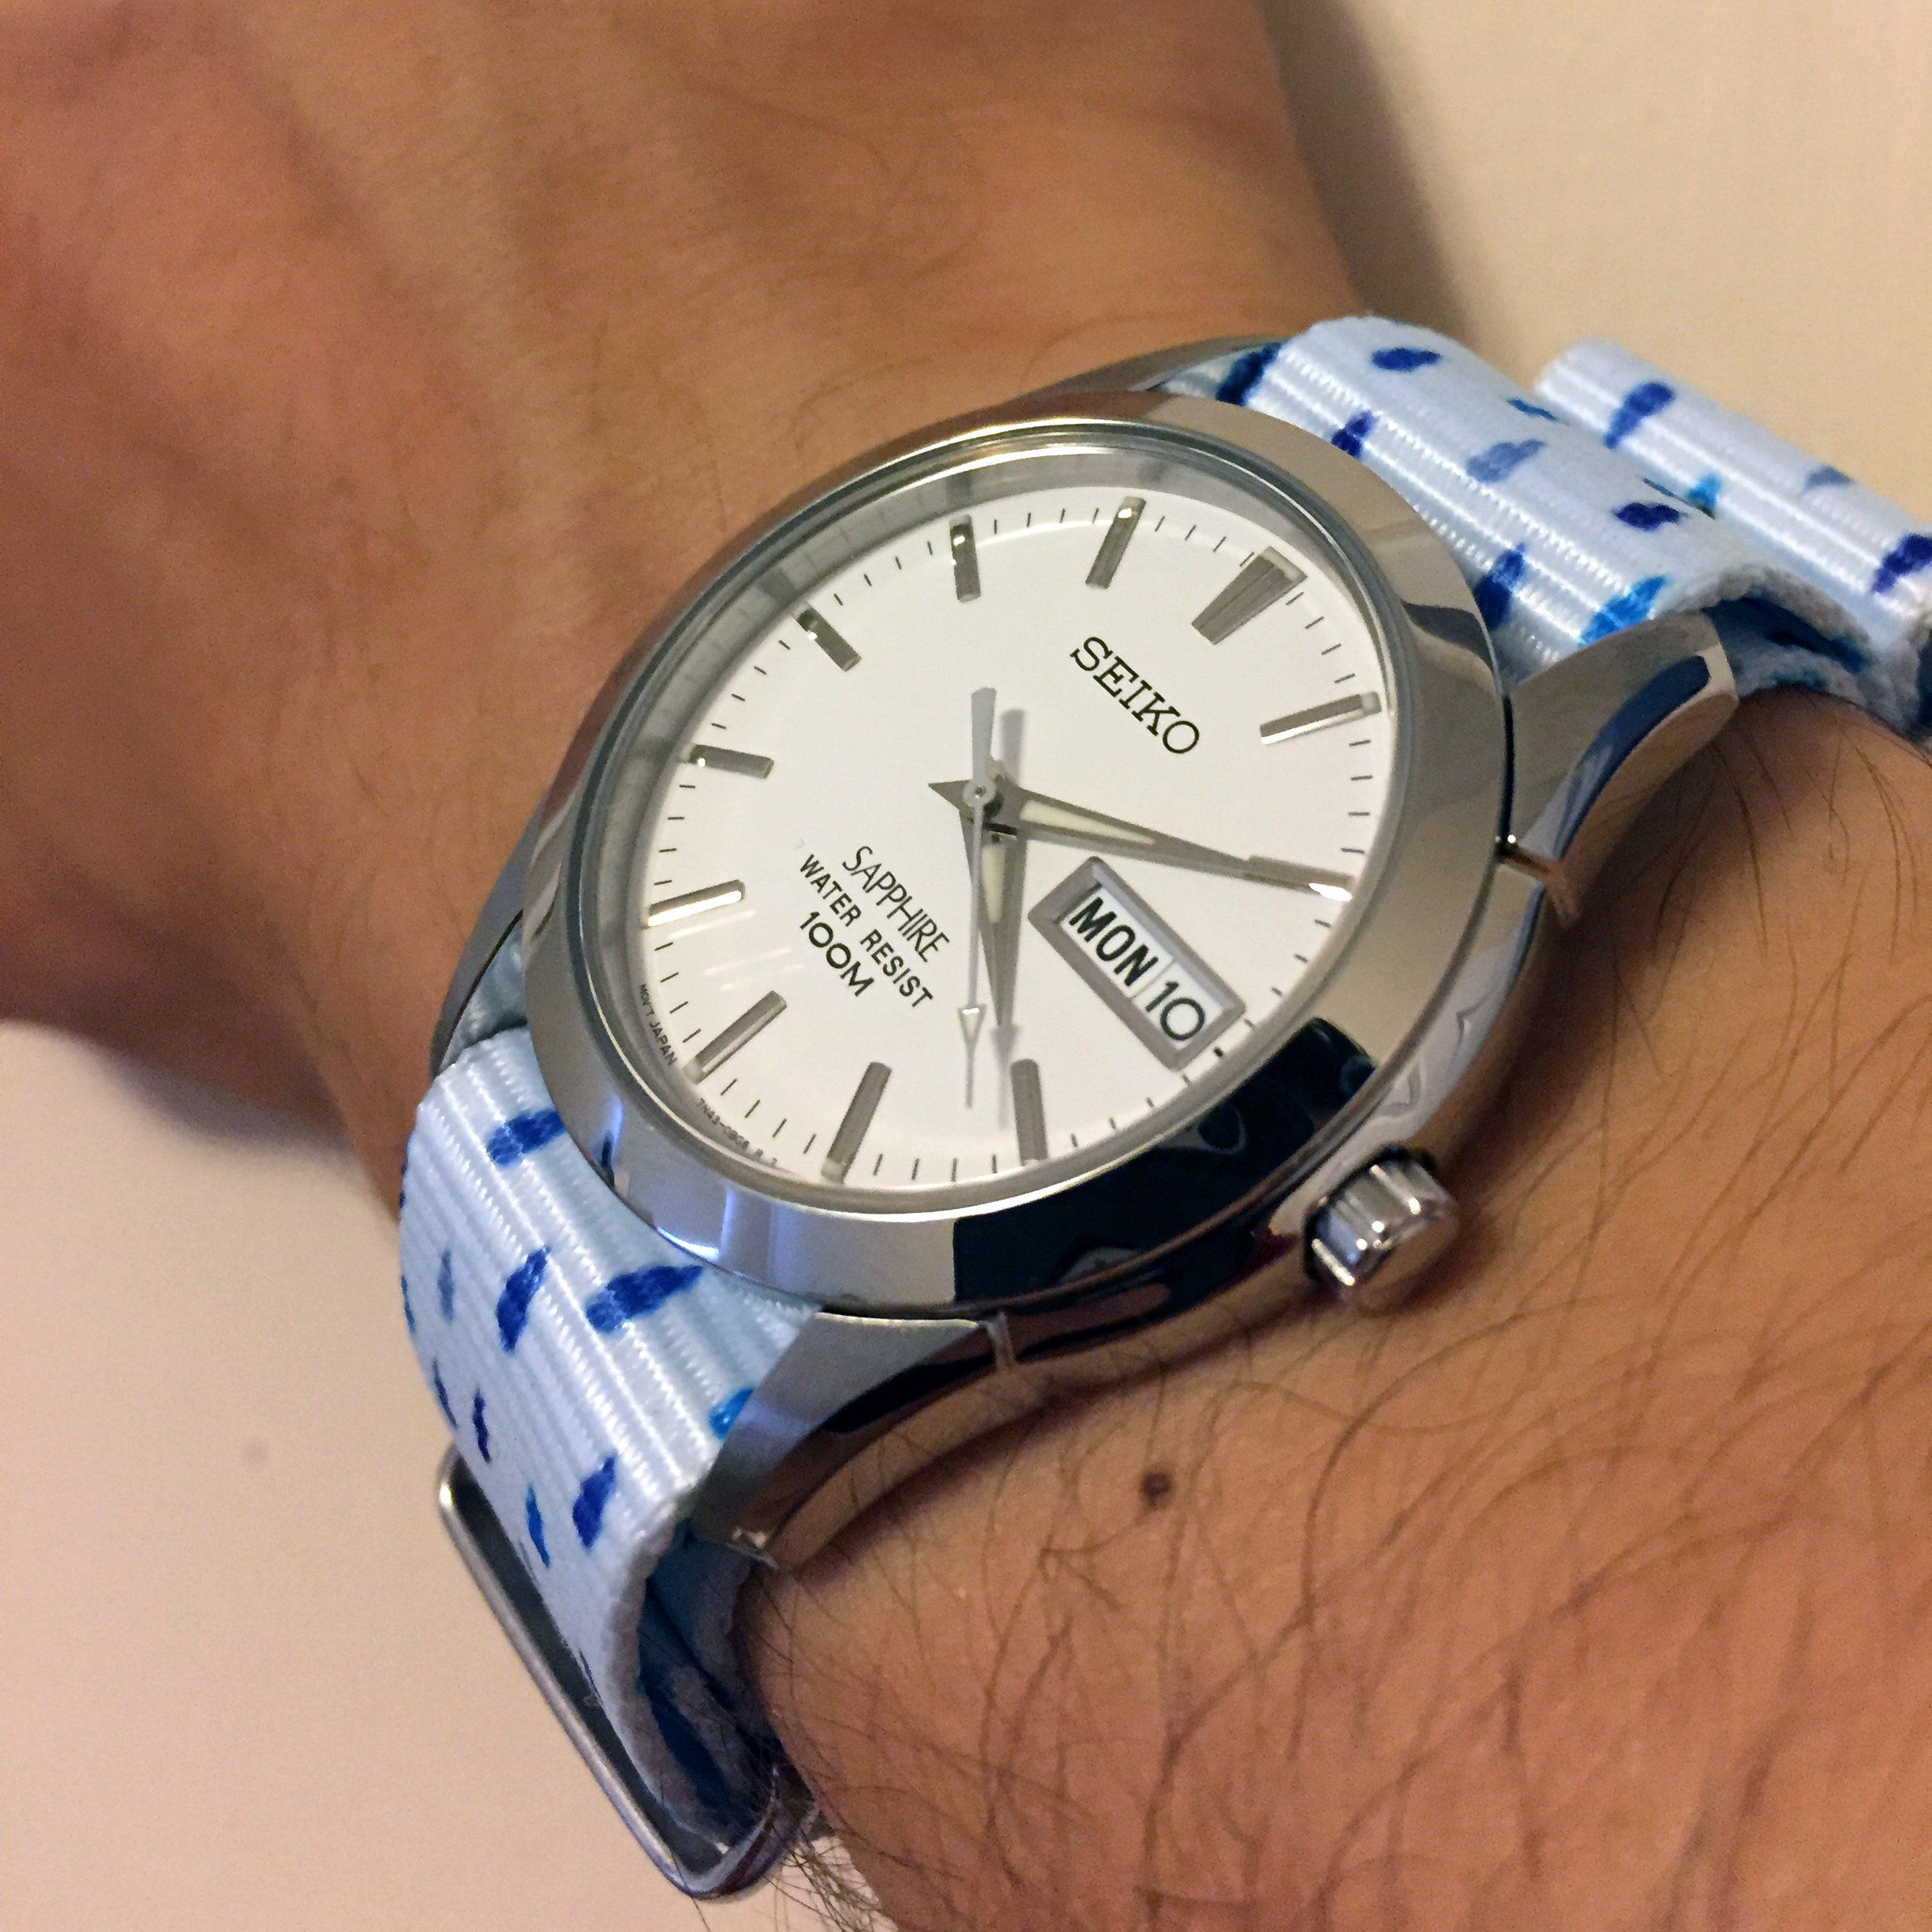 Seiko watch with Vario Graphic strap by #varioeveryday member James